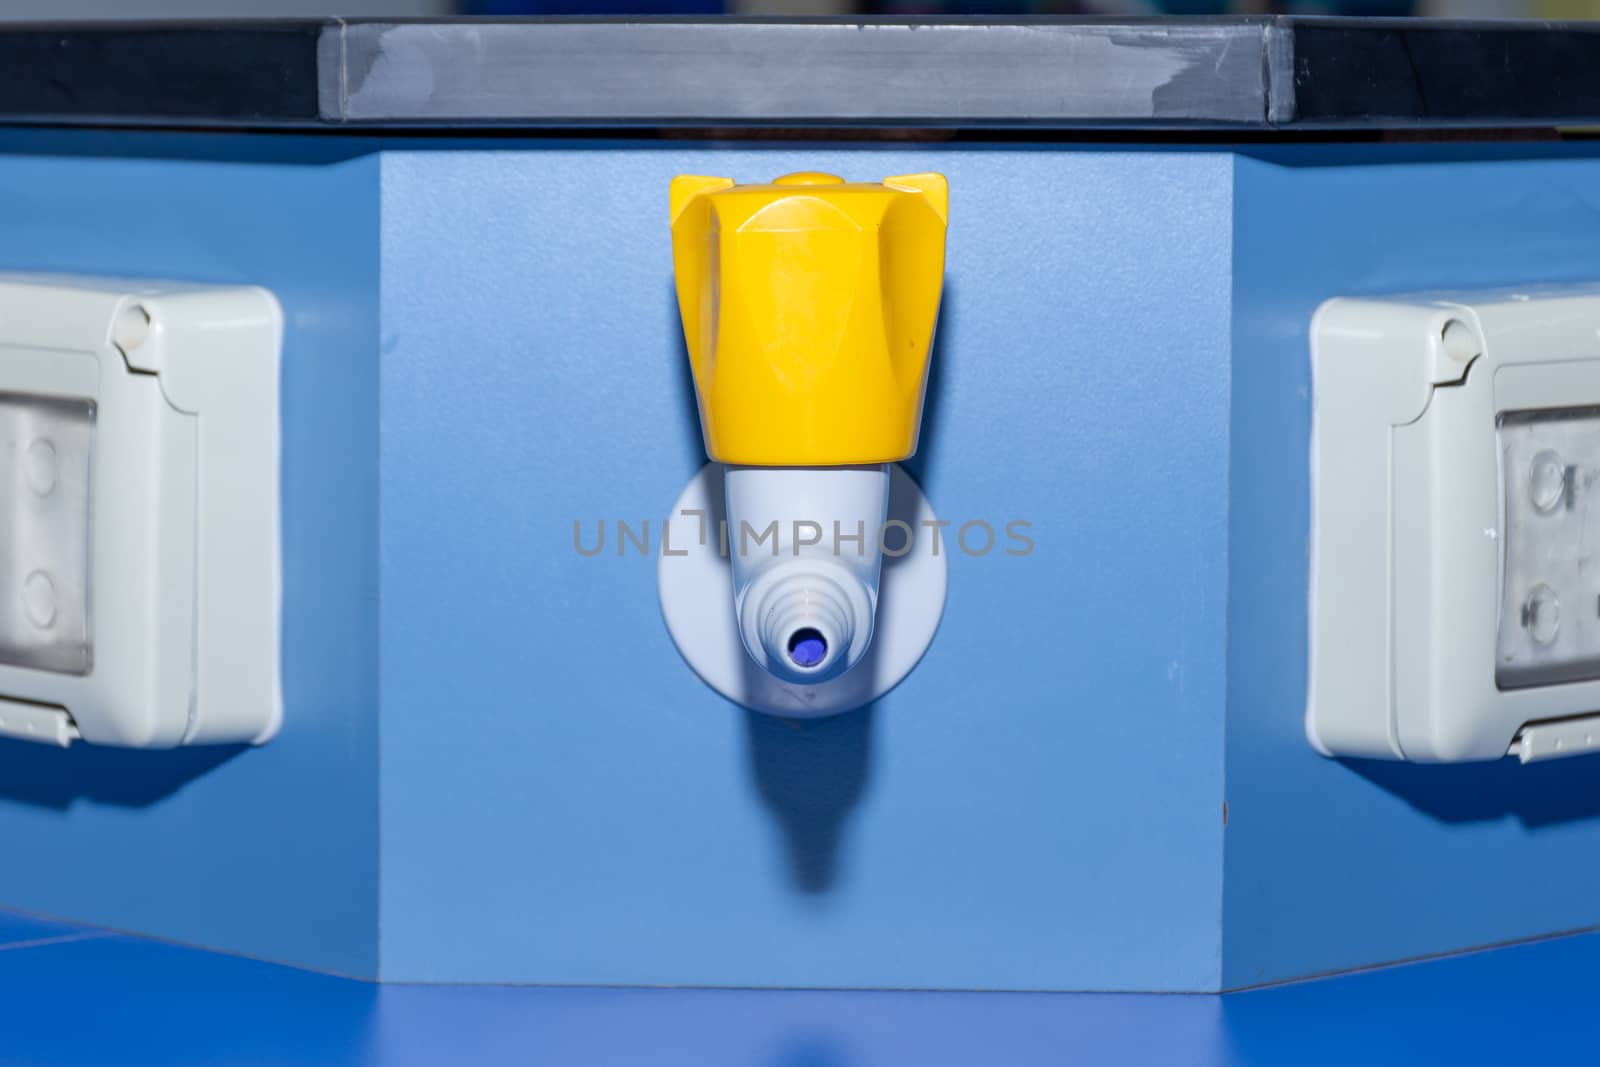 Science laboratory gas nozzle on a blue empty school lab table i by kingmaphotos